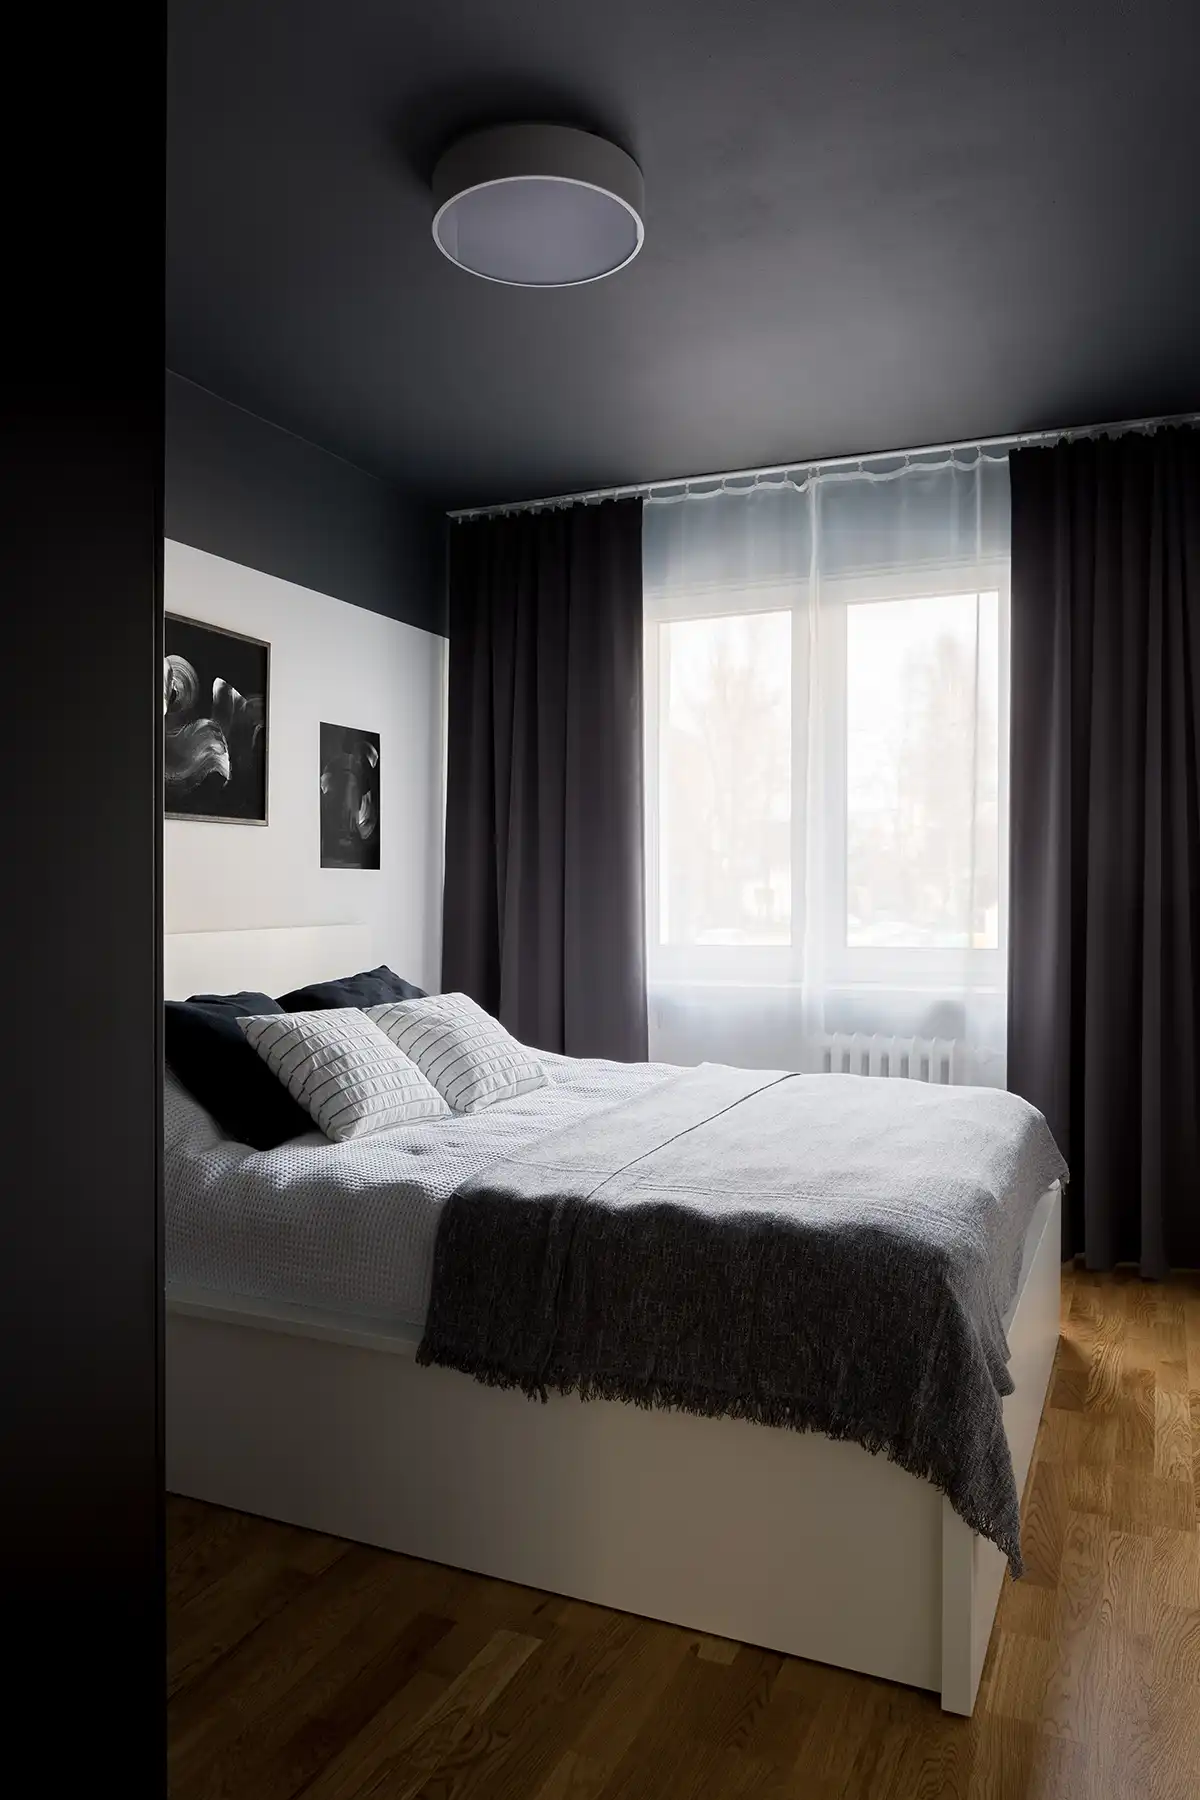 Black and white Bedroom